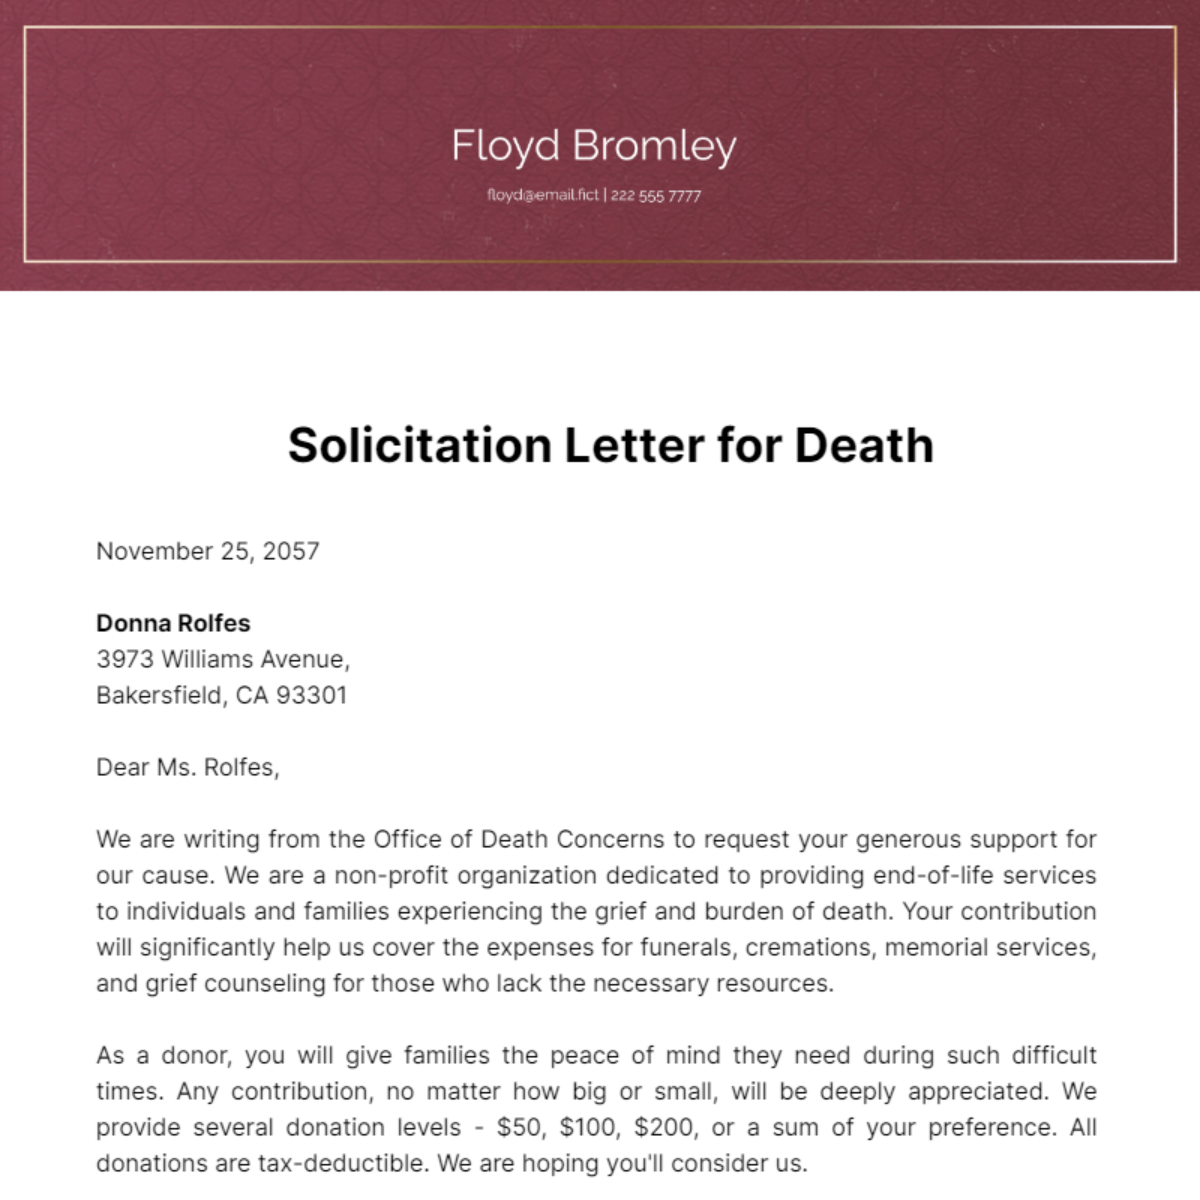 Solicitation Letter for Death Template